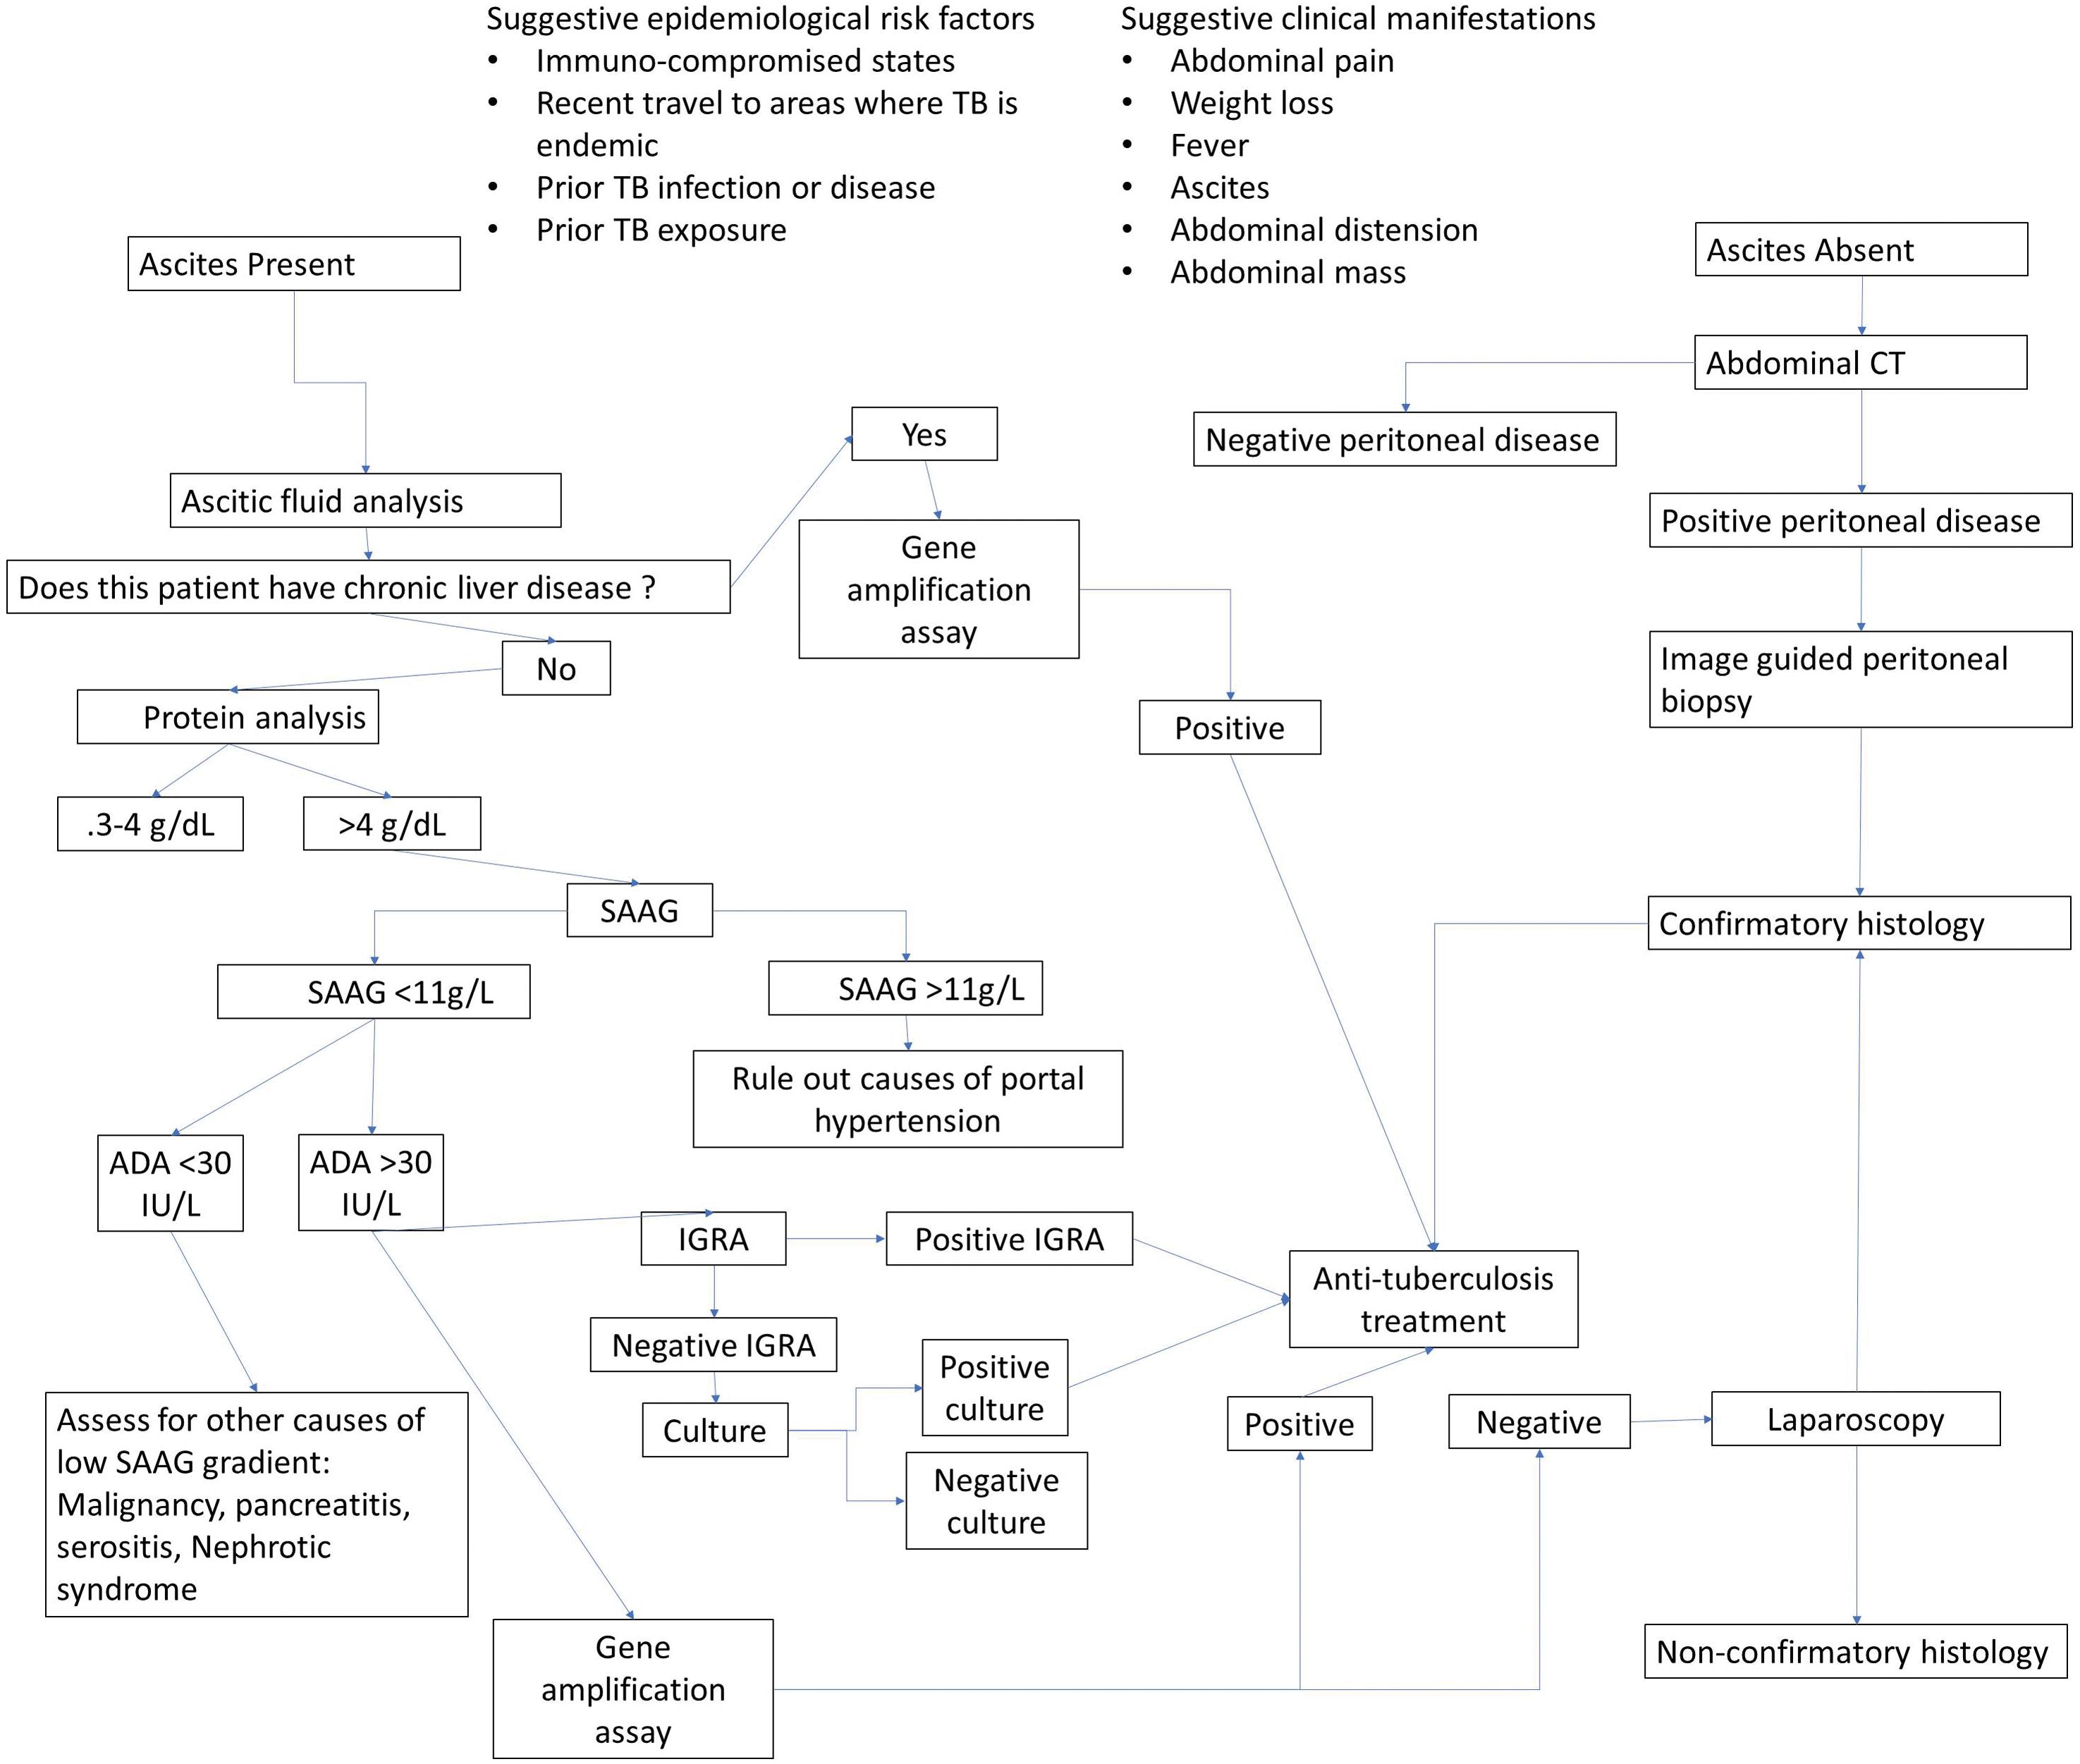 Proposed algorithm for diagnostic strategies in PTB, adapted and modified from Sinai, 2005.